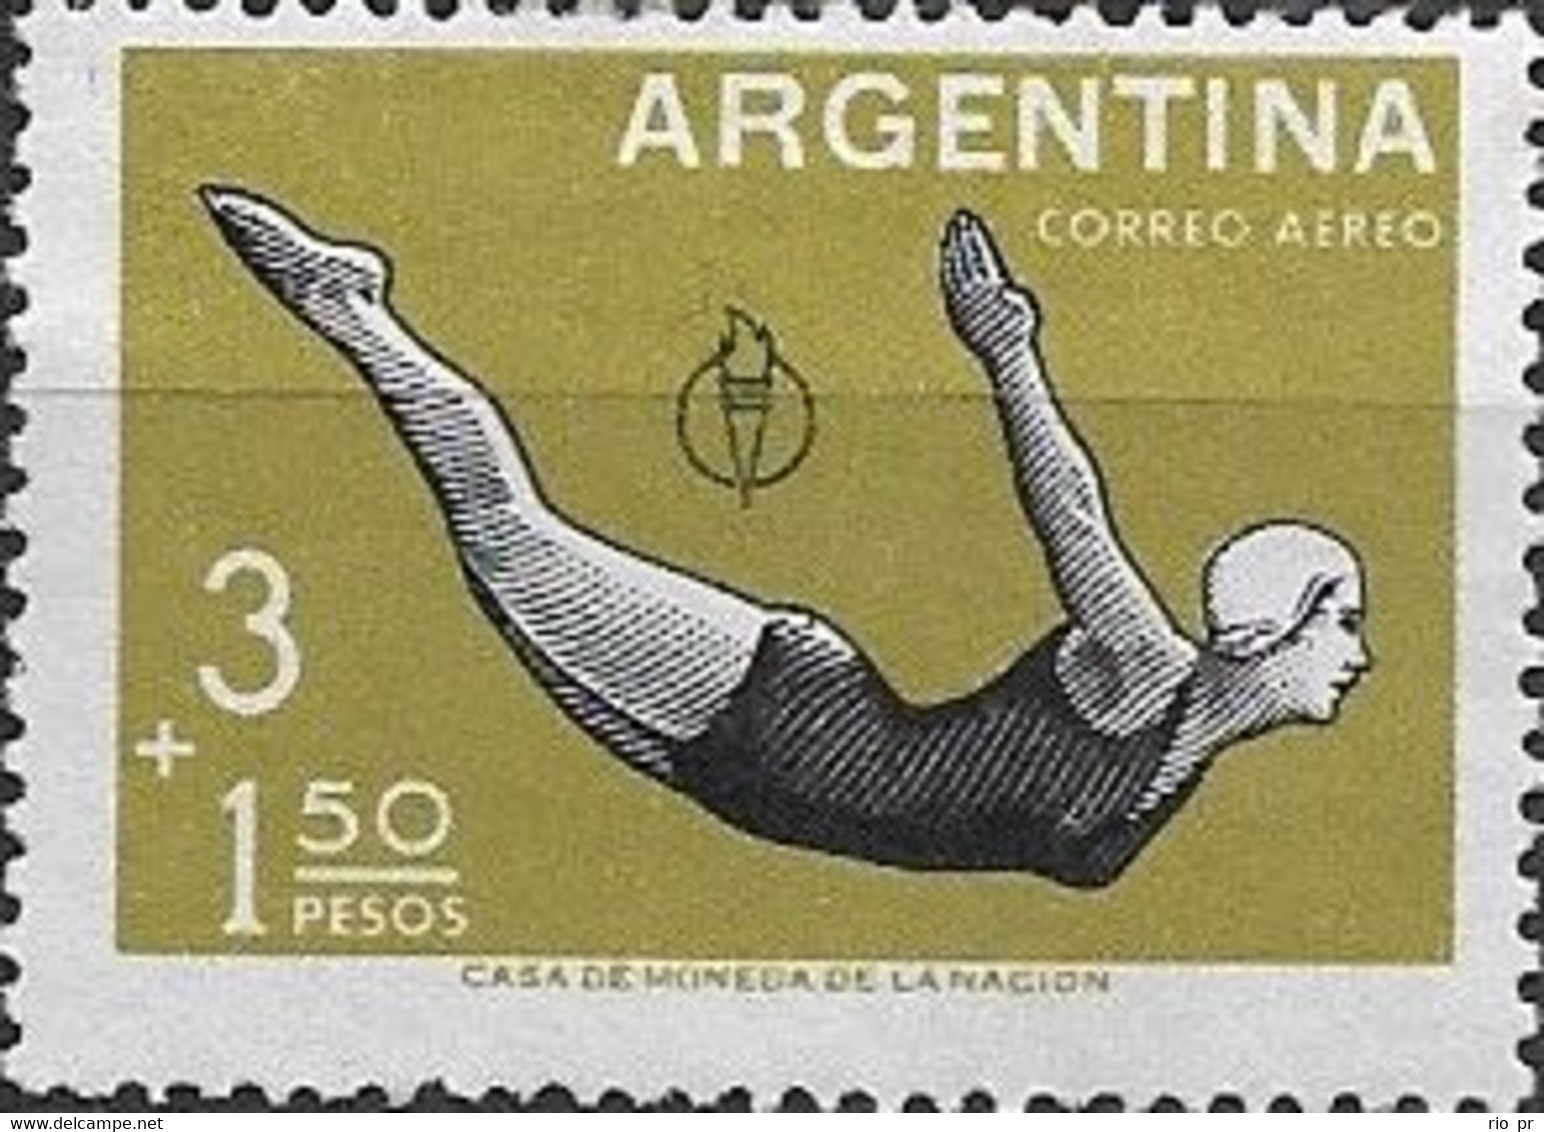 ARGENTINA - 3rd PANAMERICAN GAMES, CHICAGO/USA (DIVING) 1959 - MNH - Immersione